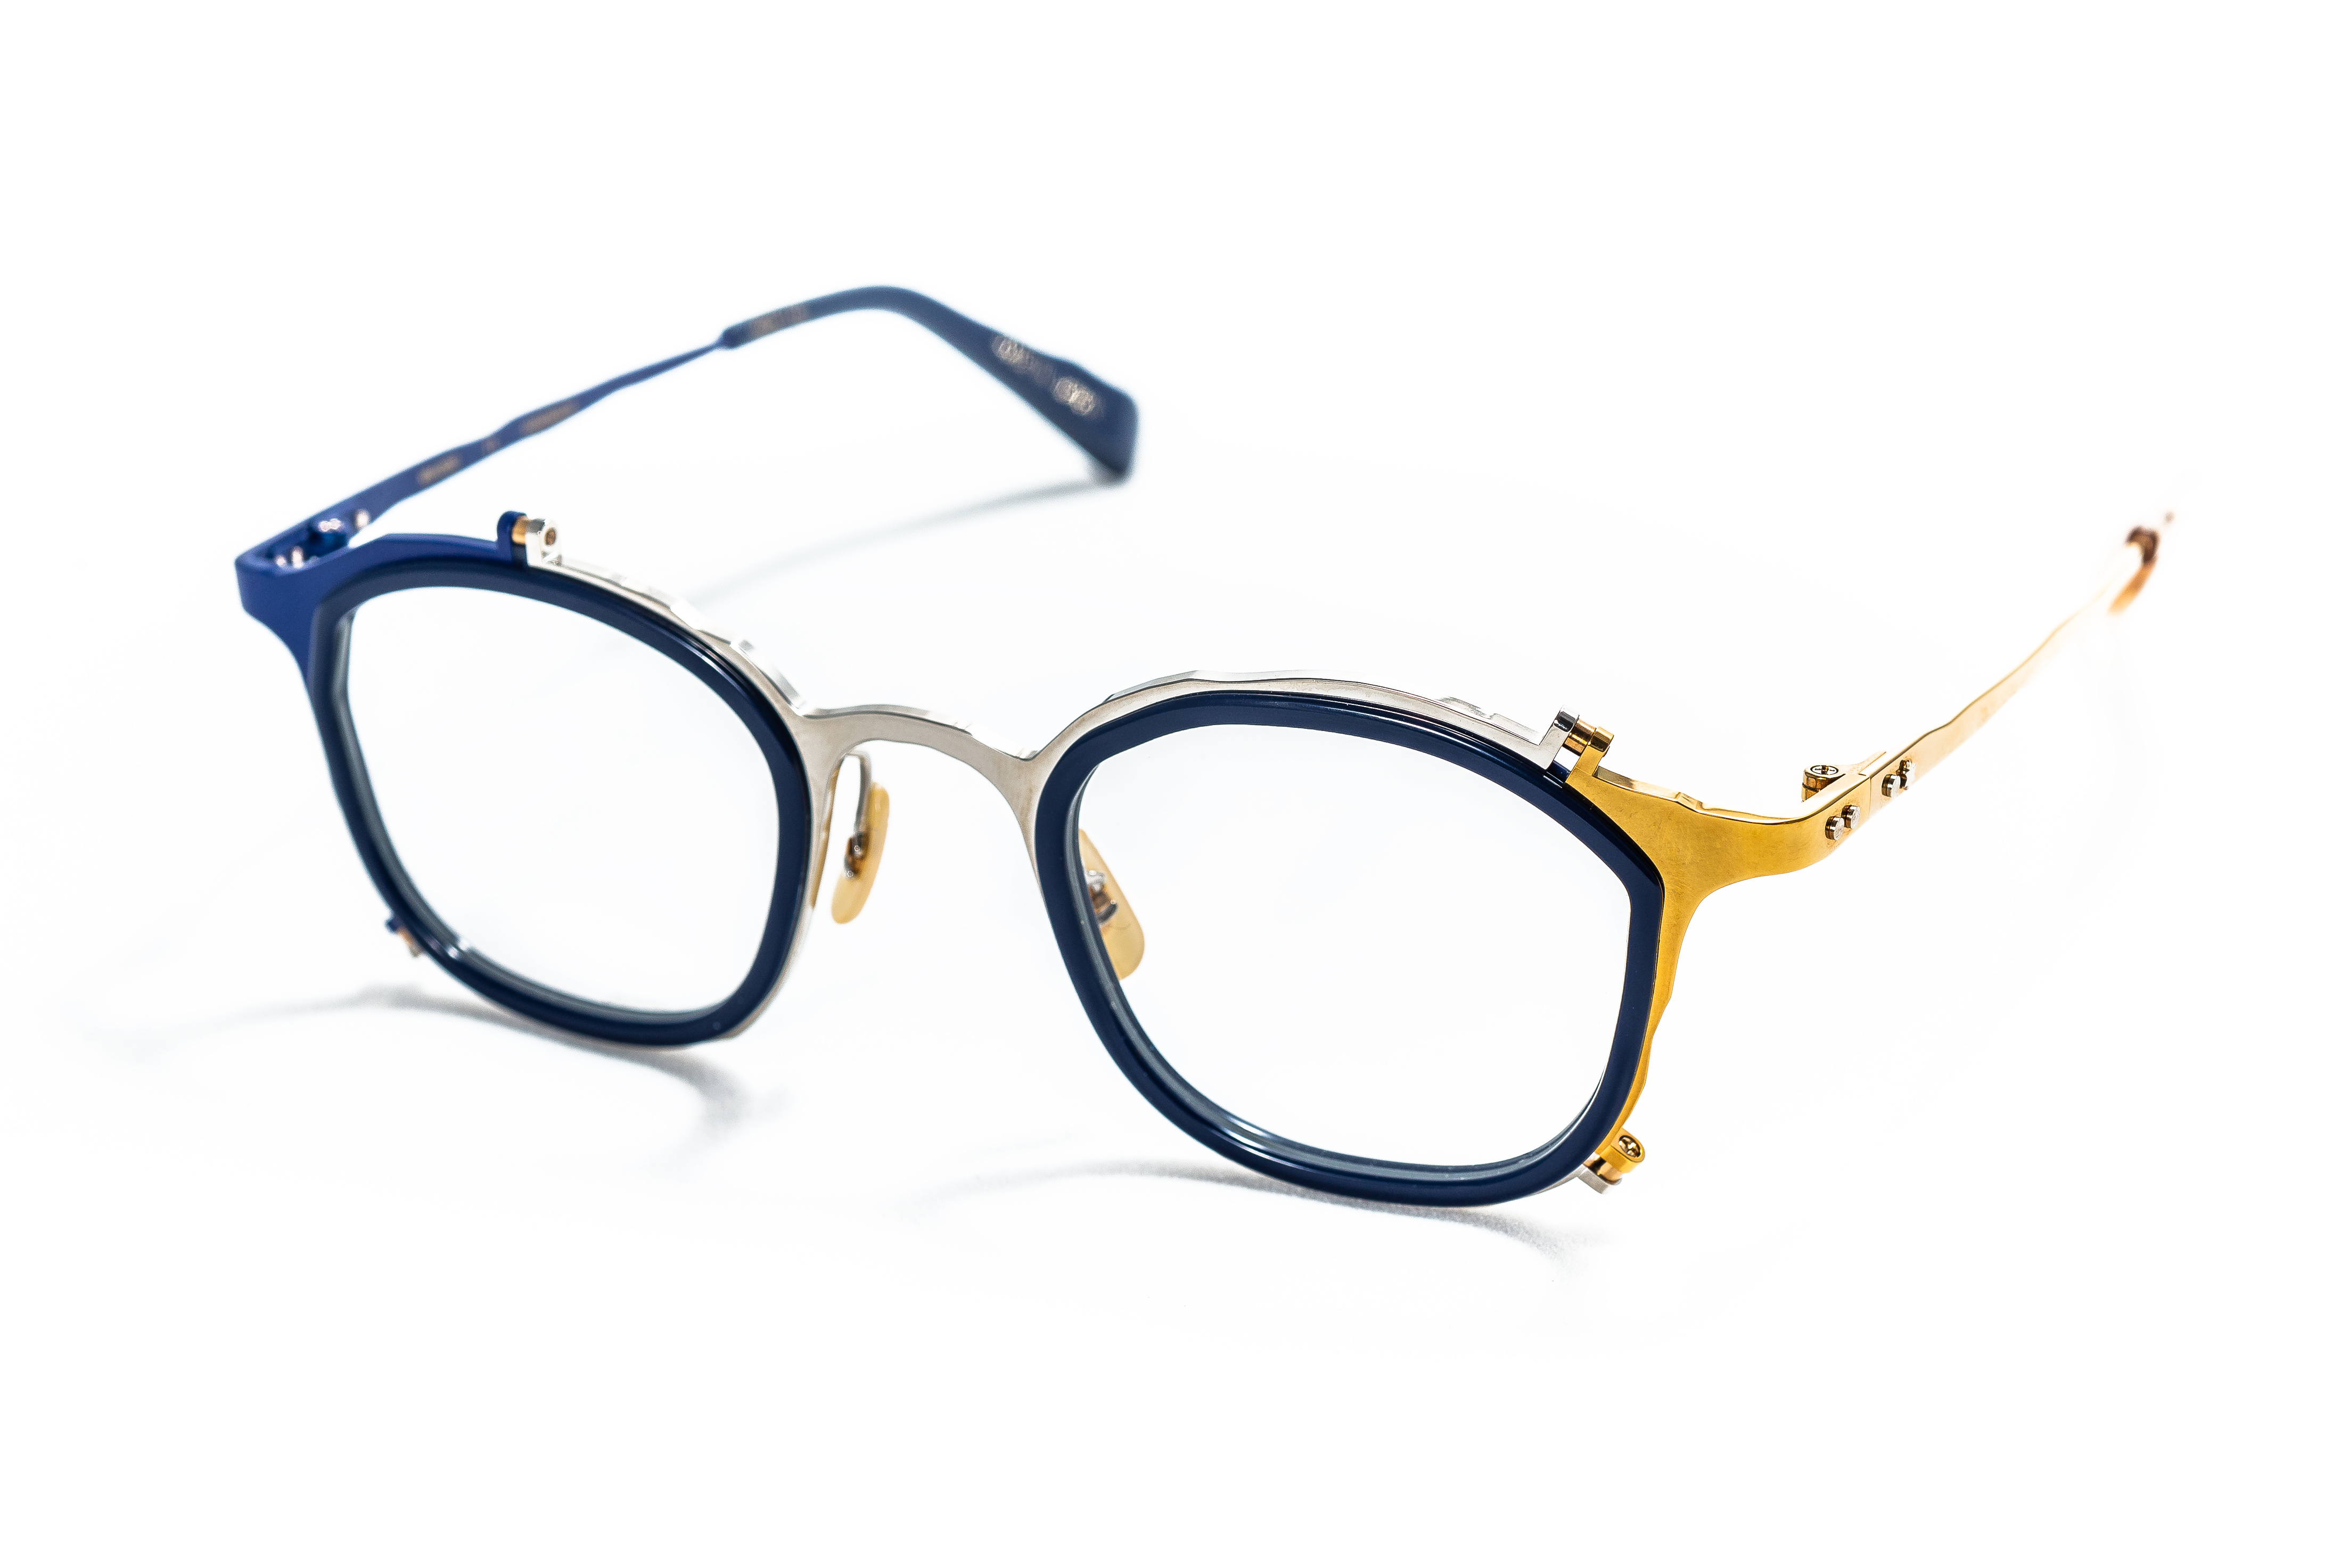 MM-0030 No.4 Navy / Navy - Silver - Gold- The New Bl...